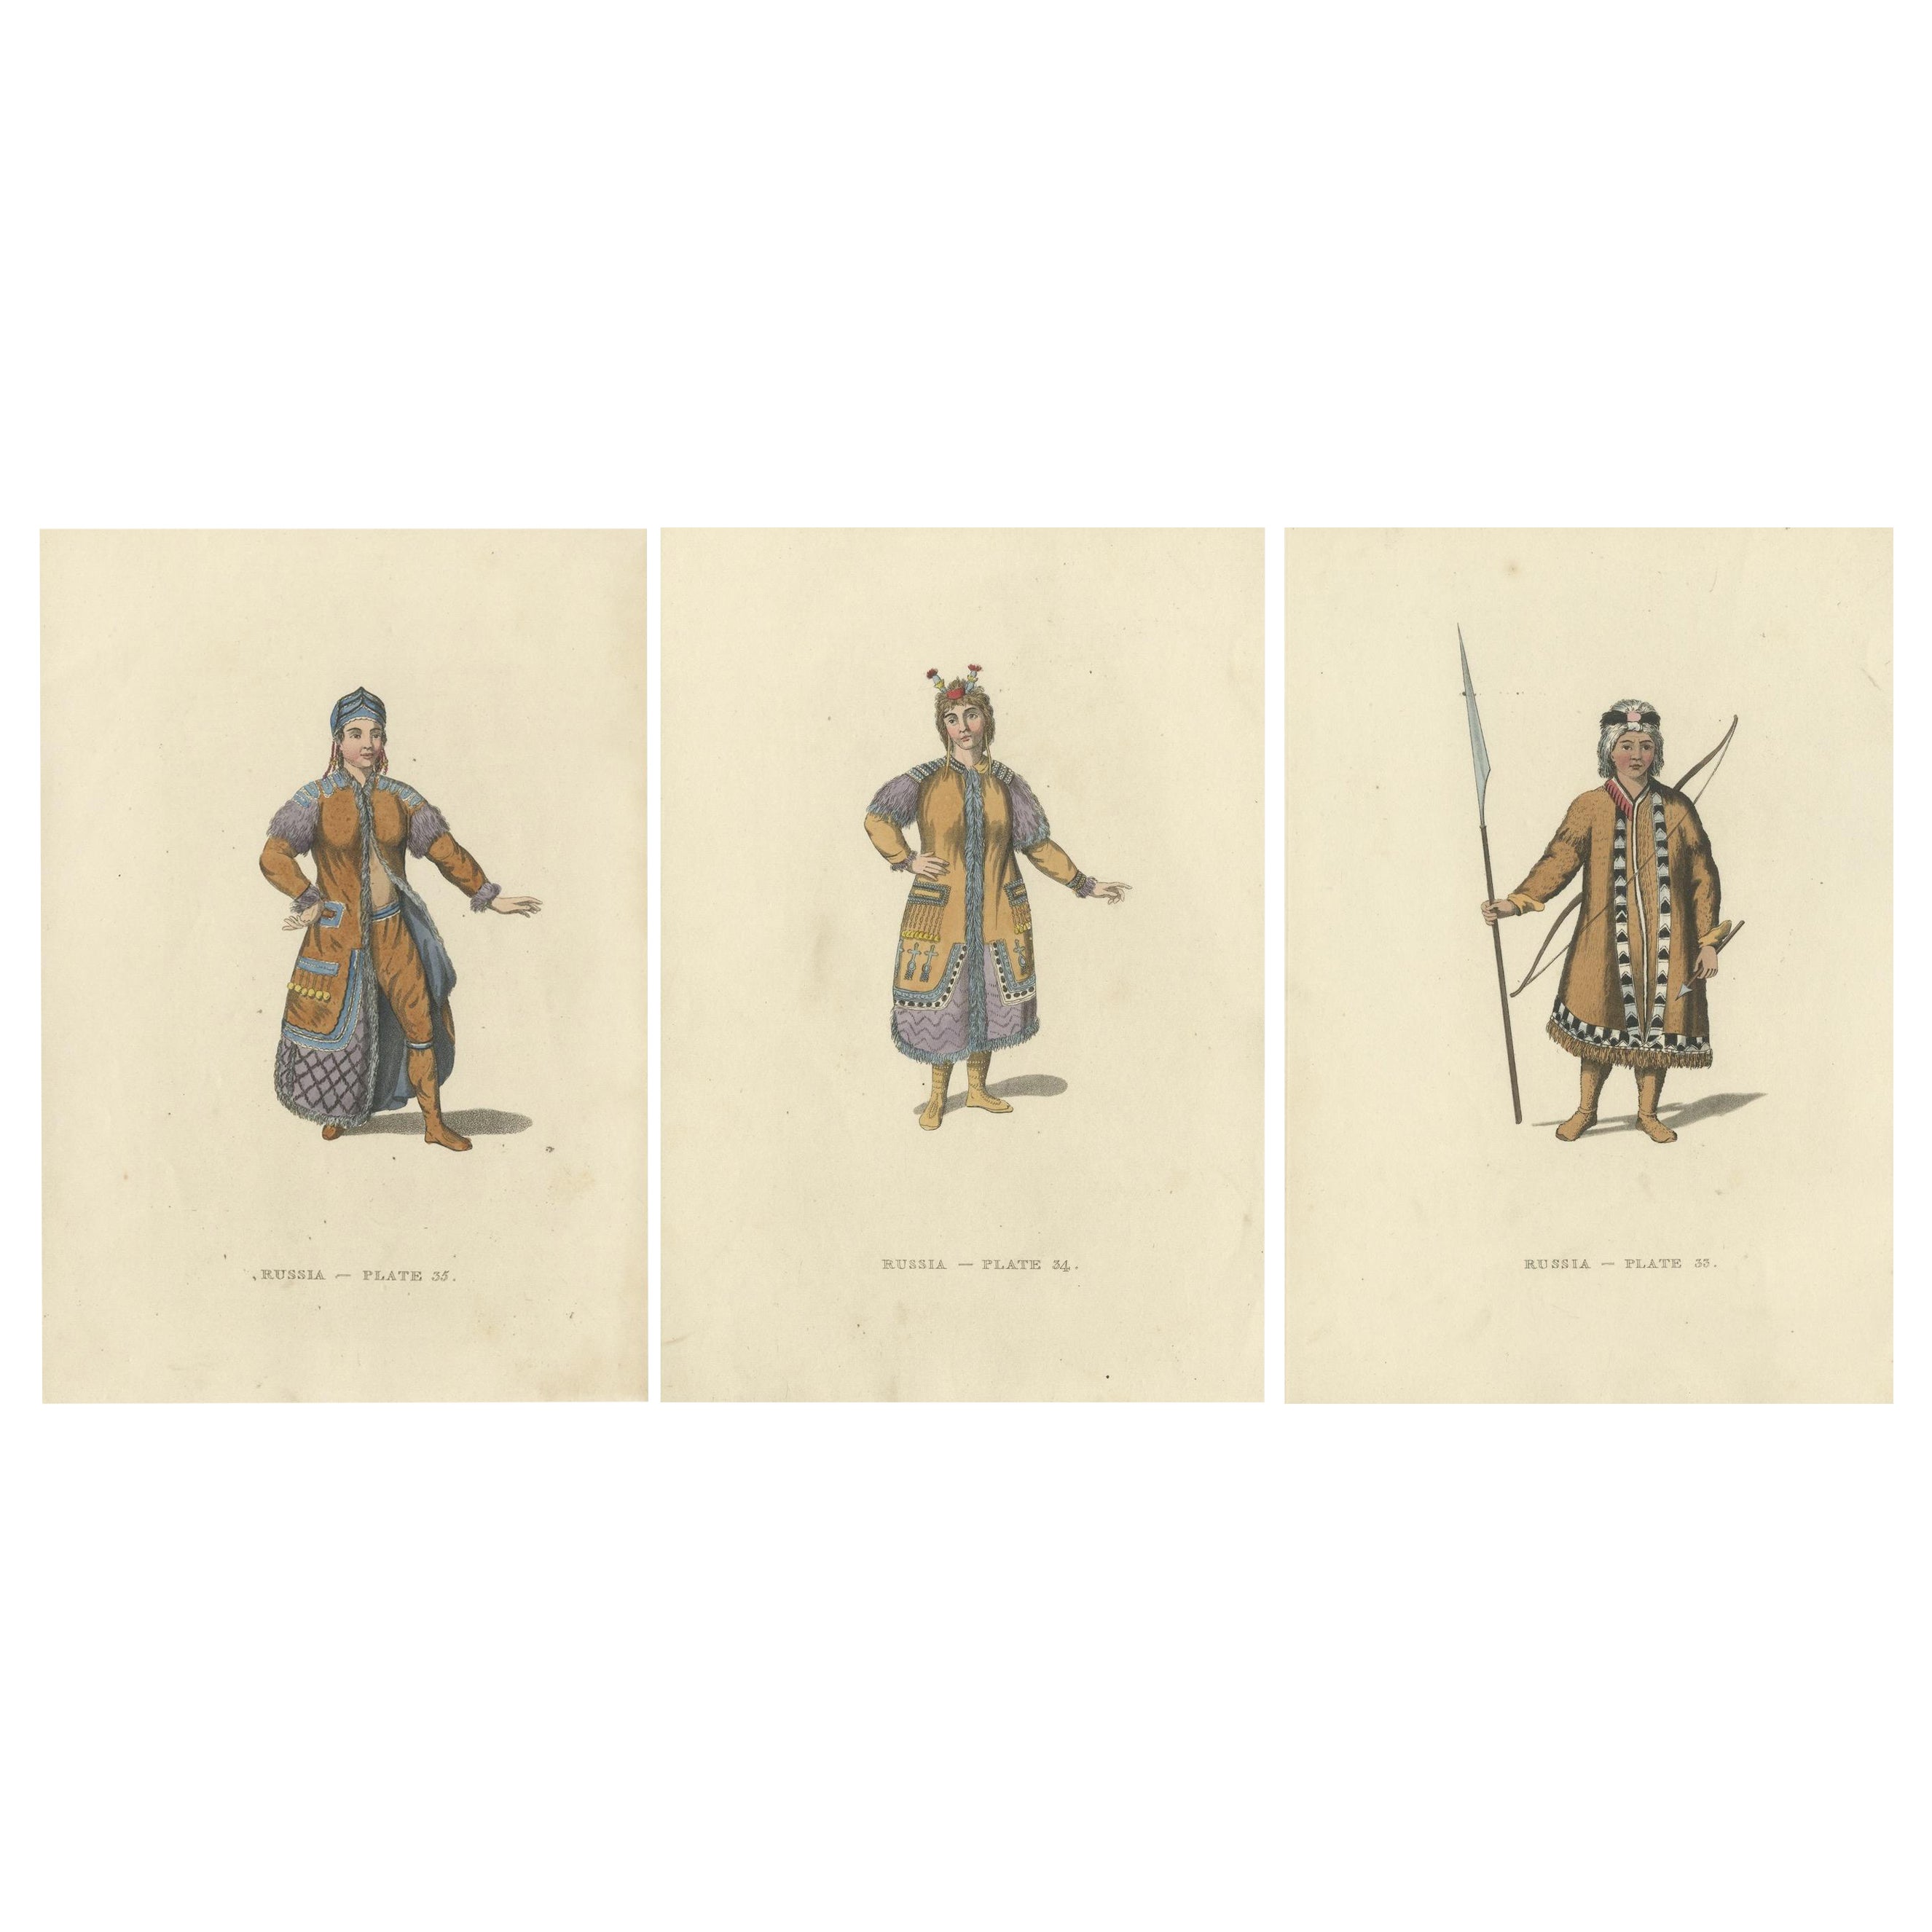 Engravings Depicting the Dress and Manners of the Yakouti Tribes in Russia, 1814